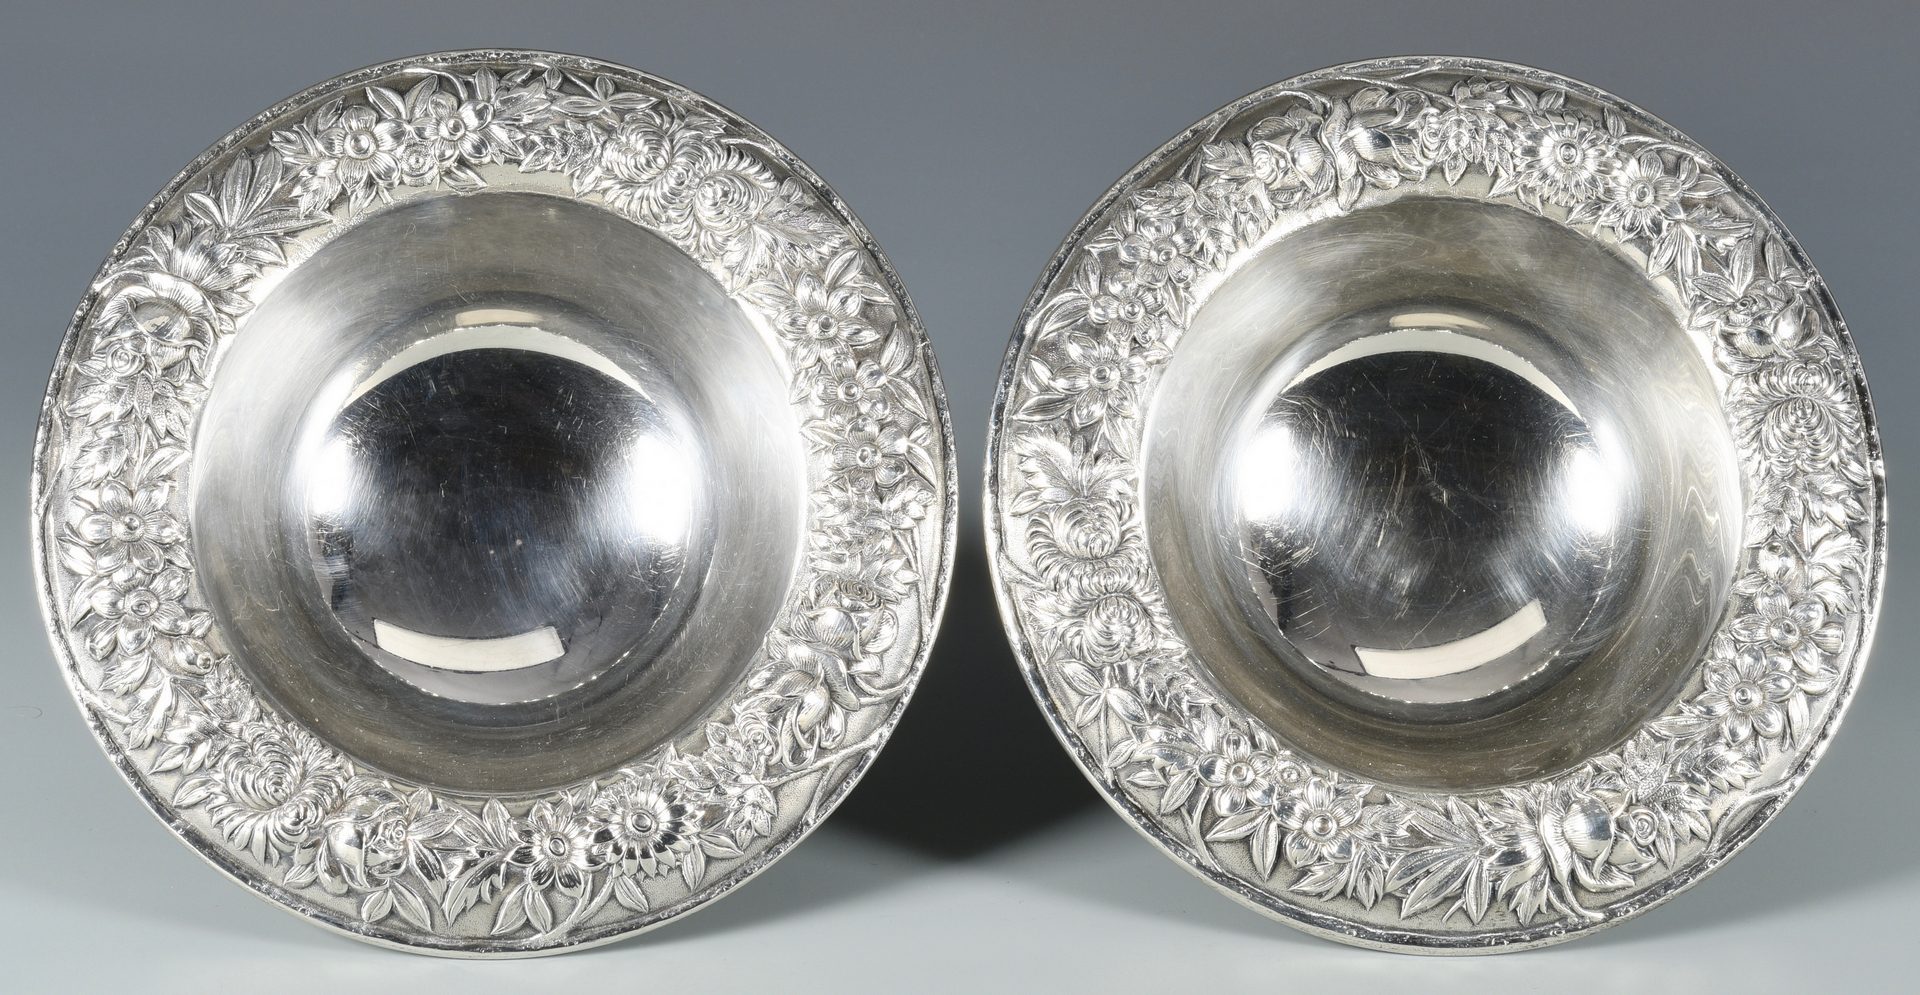 Lot 50: Pair S. Kirk & Son Repousse Sterling Compotes